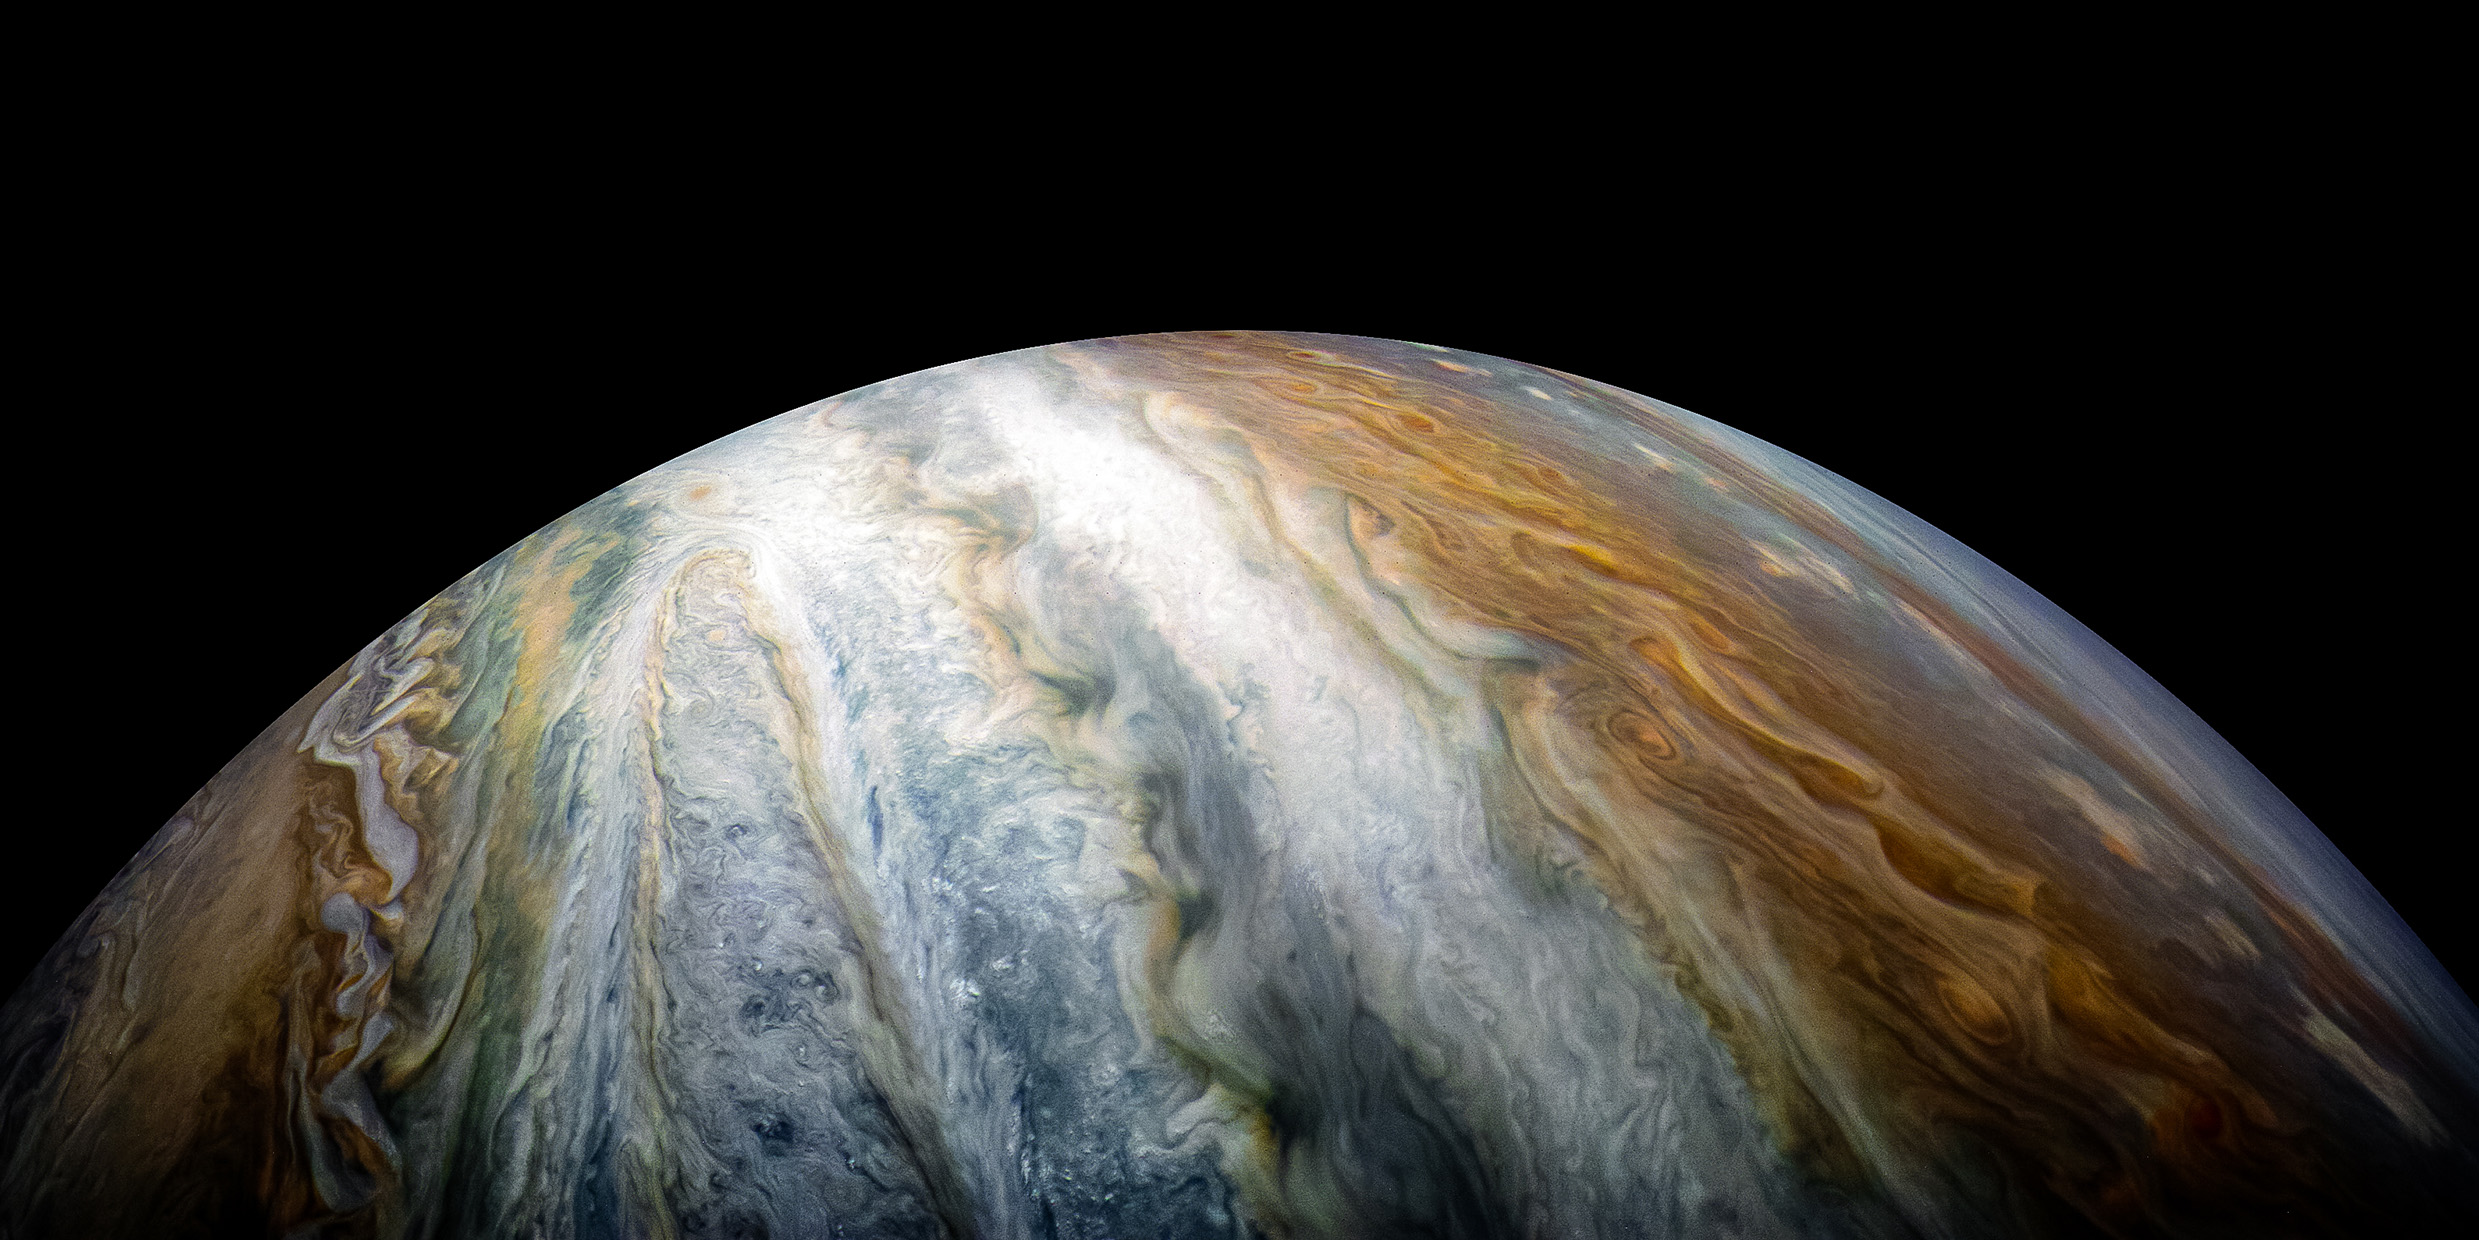 Astronomical image of the swirling atmosphere of Jupiter